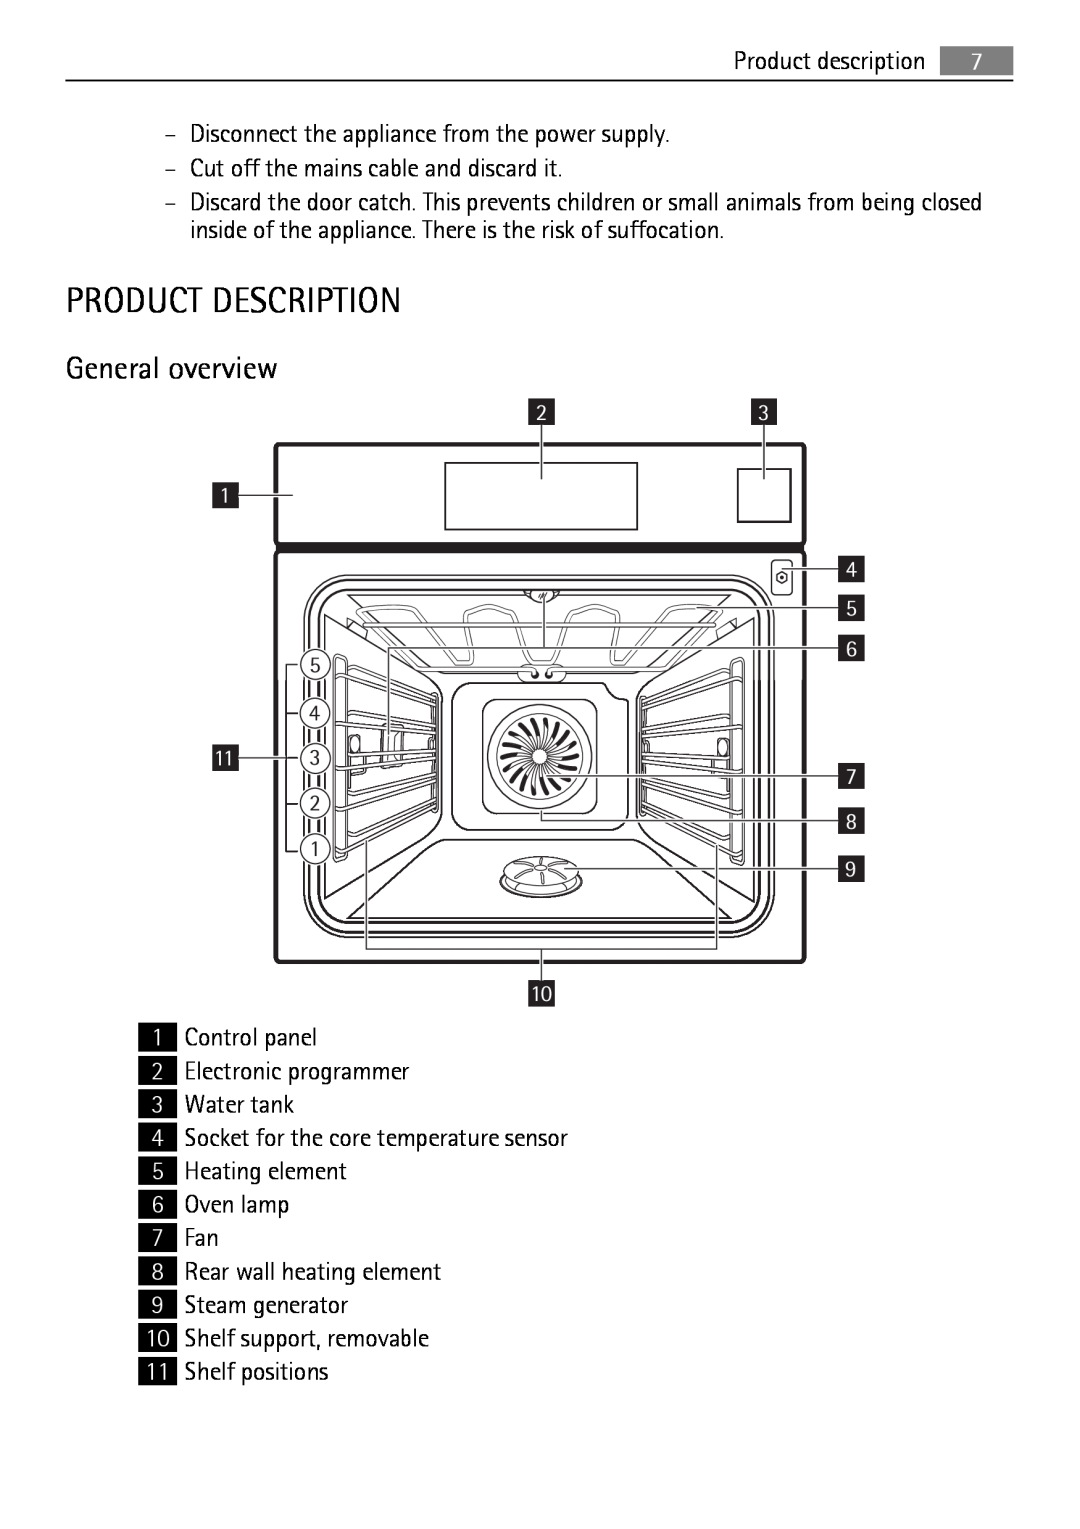 AEG BS7304001M user manual Product Description, General overview 